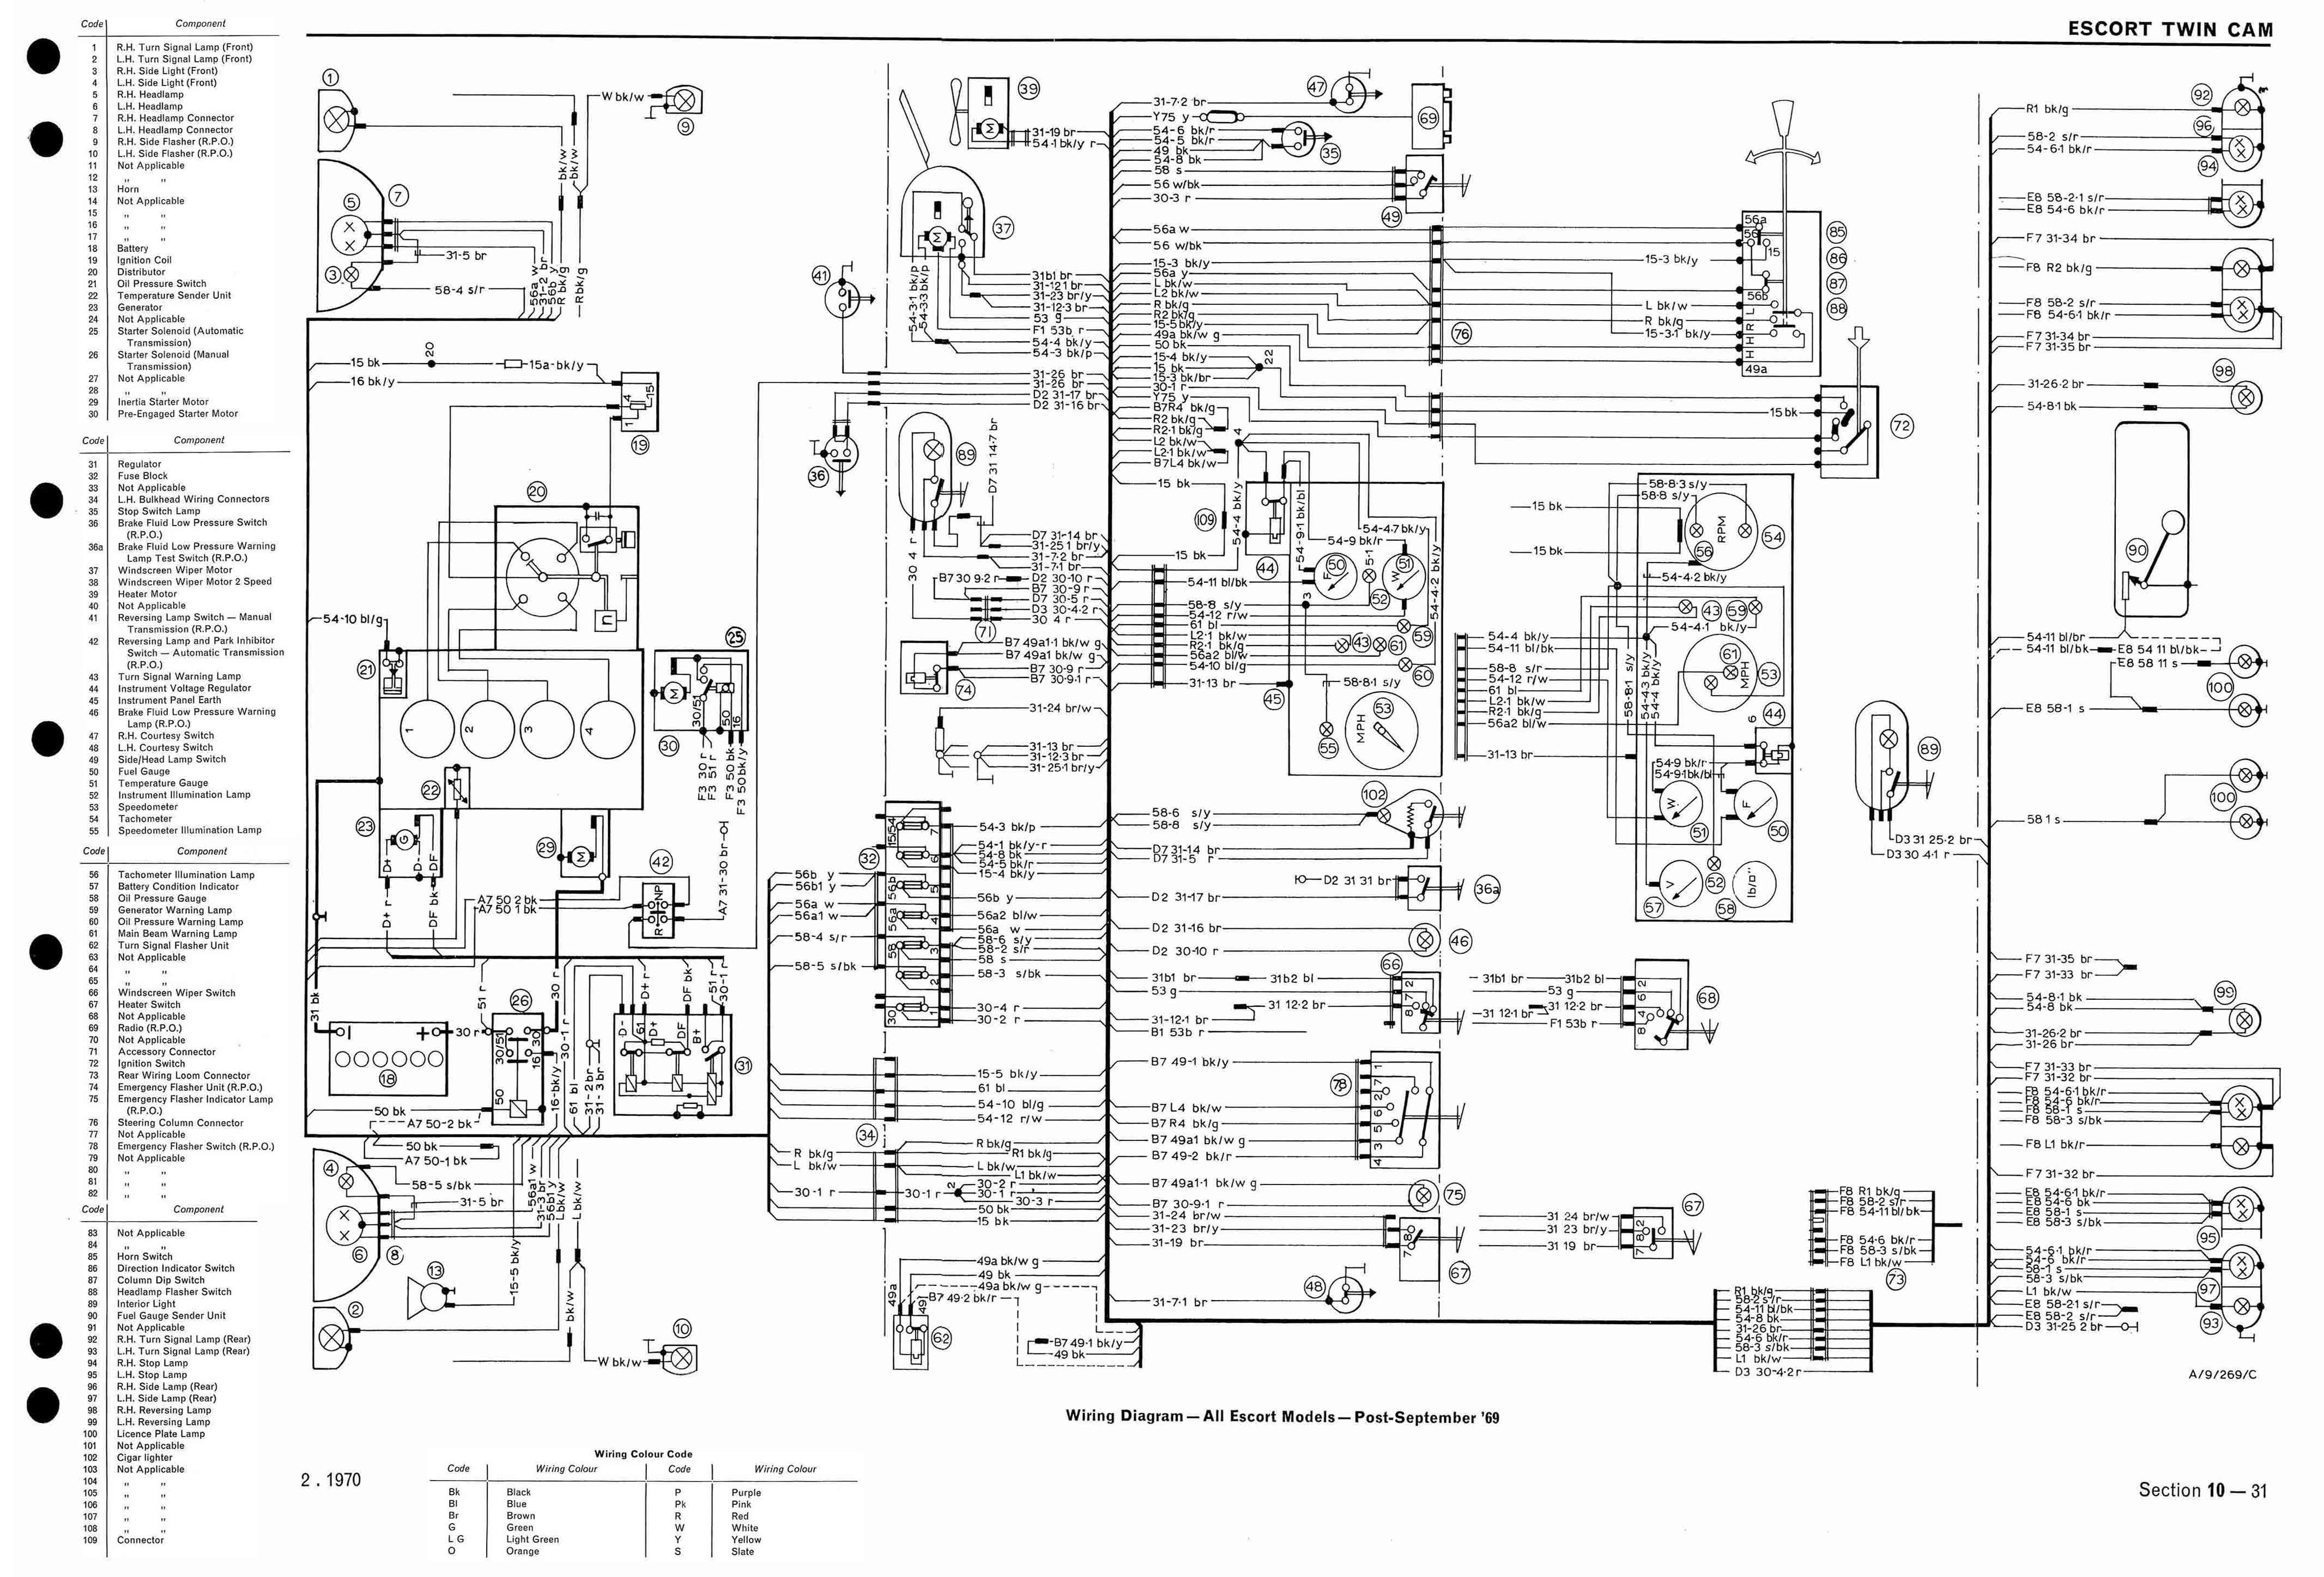 Ford Escort Engine Diagram Awesome 1997 ford Escort Wiring Diagram S Everything You Need